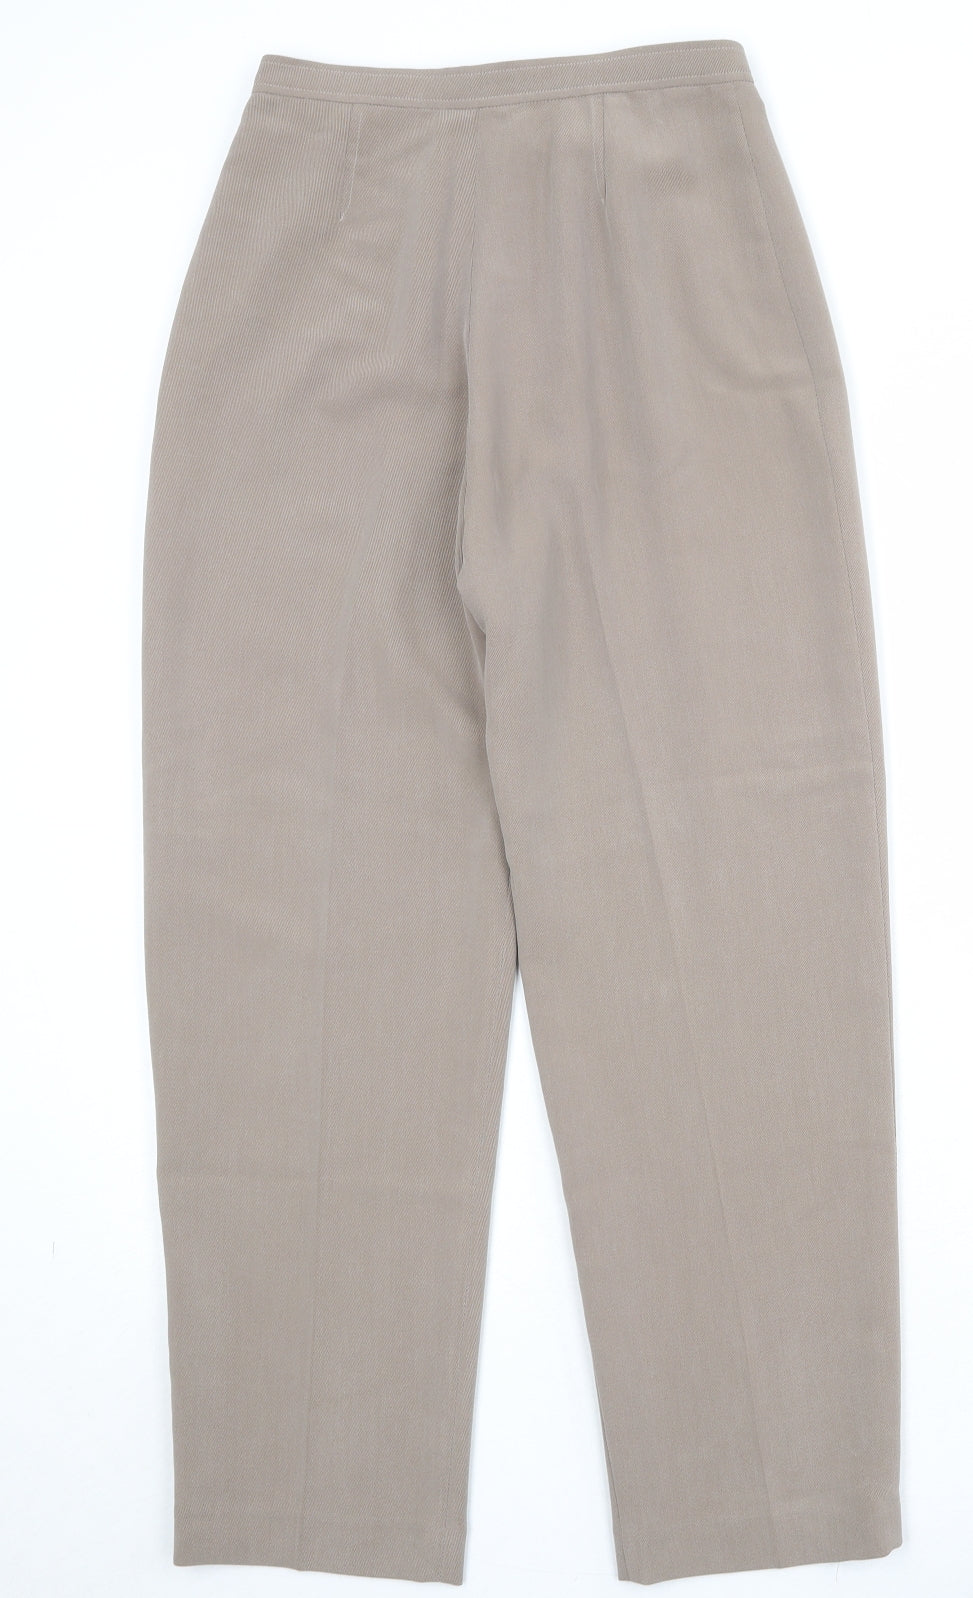 Country Casuals Womens Beige Polyester Trousers Size 10 Regular Zip